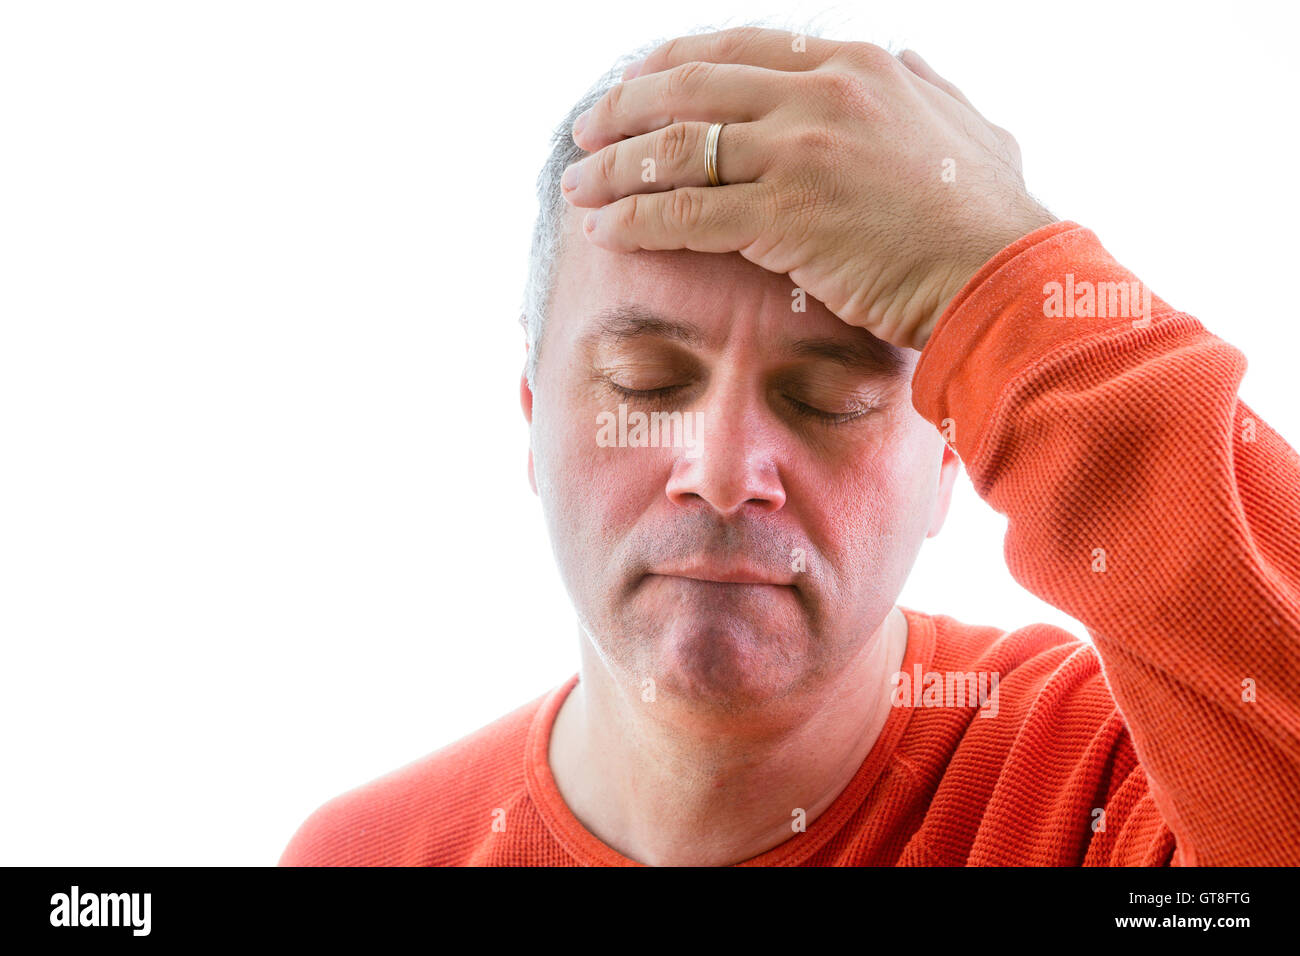 Forgetful man holding his hand to his forehead with a painstaking expression as he struggles to remember something, head and sho Stock Photo